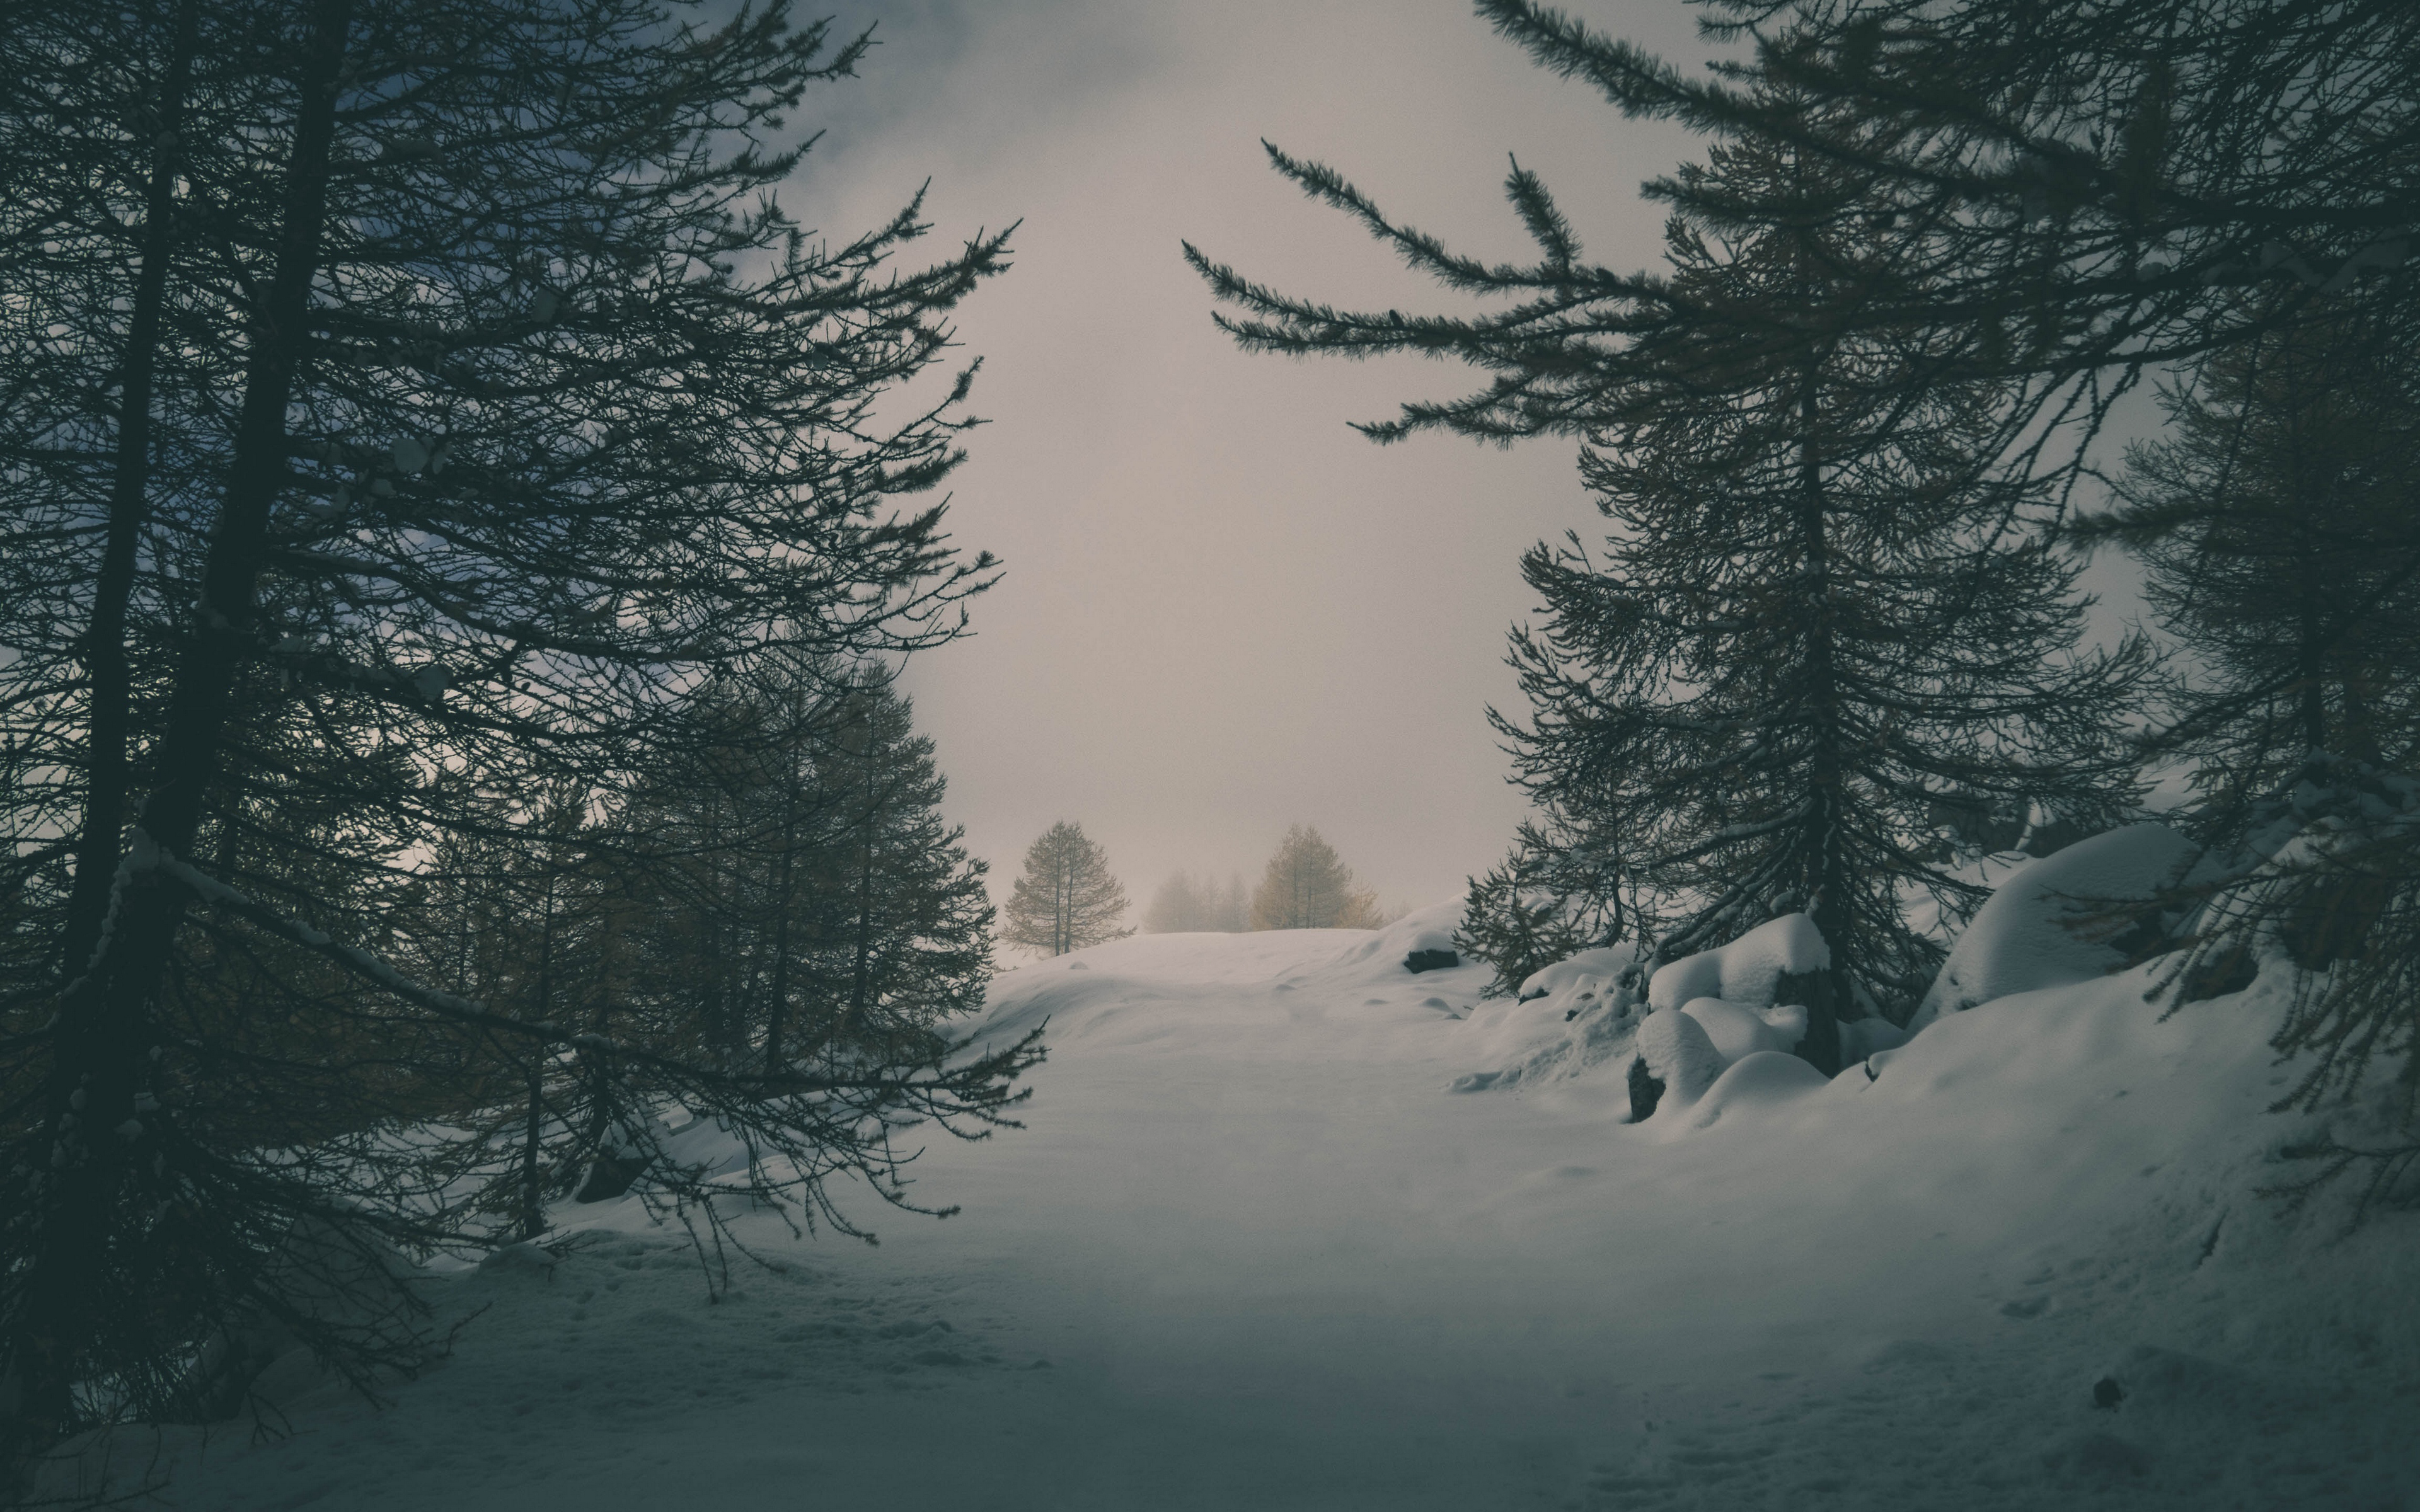 Winter Snow Forest Spruce Mist Cold Calm Photoshopped Nature 3840x2400